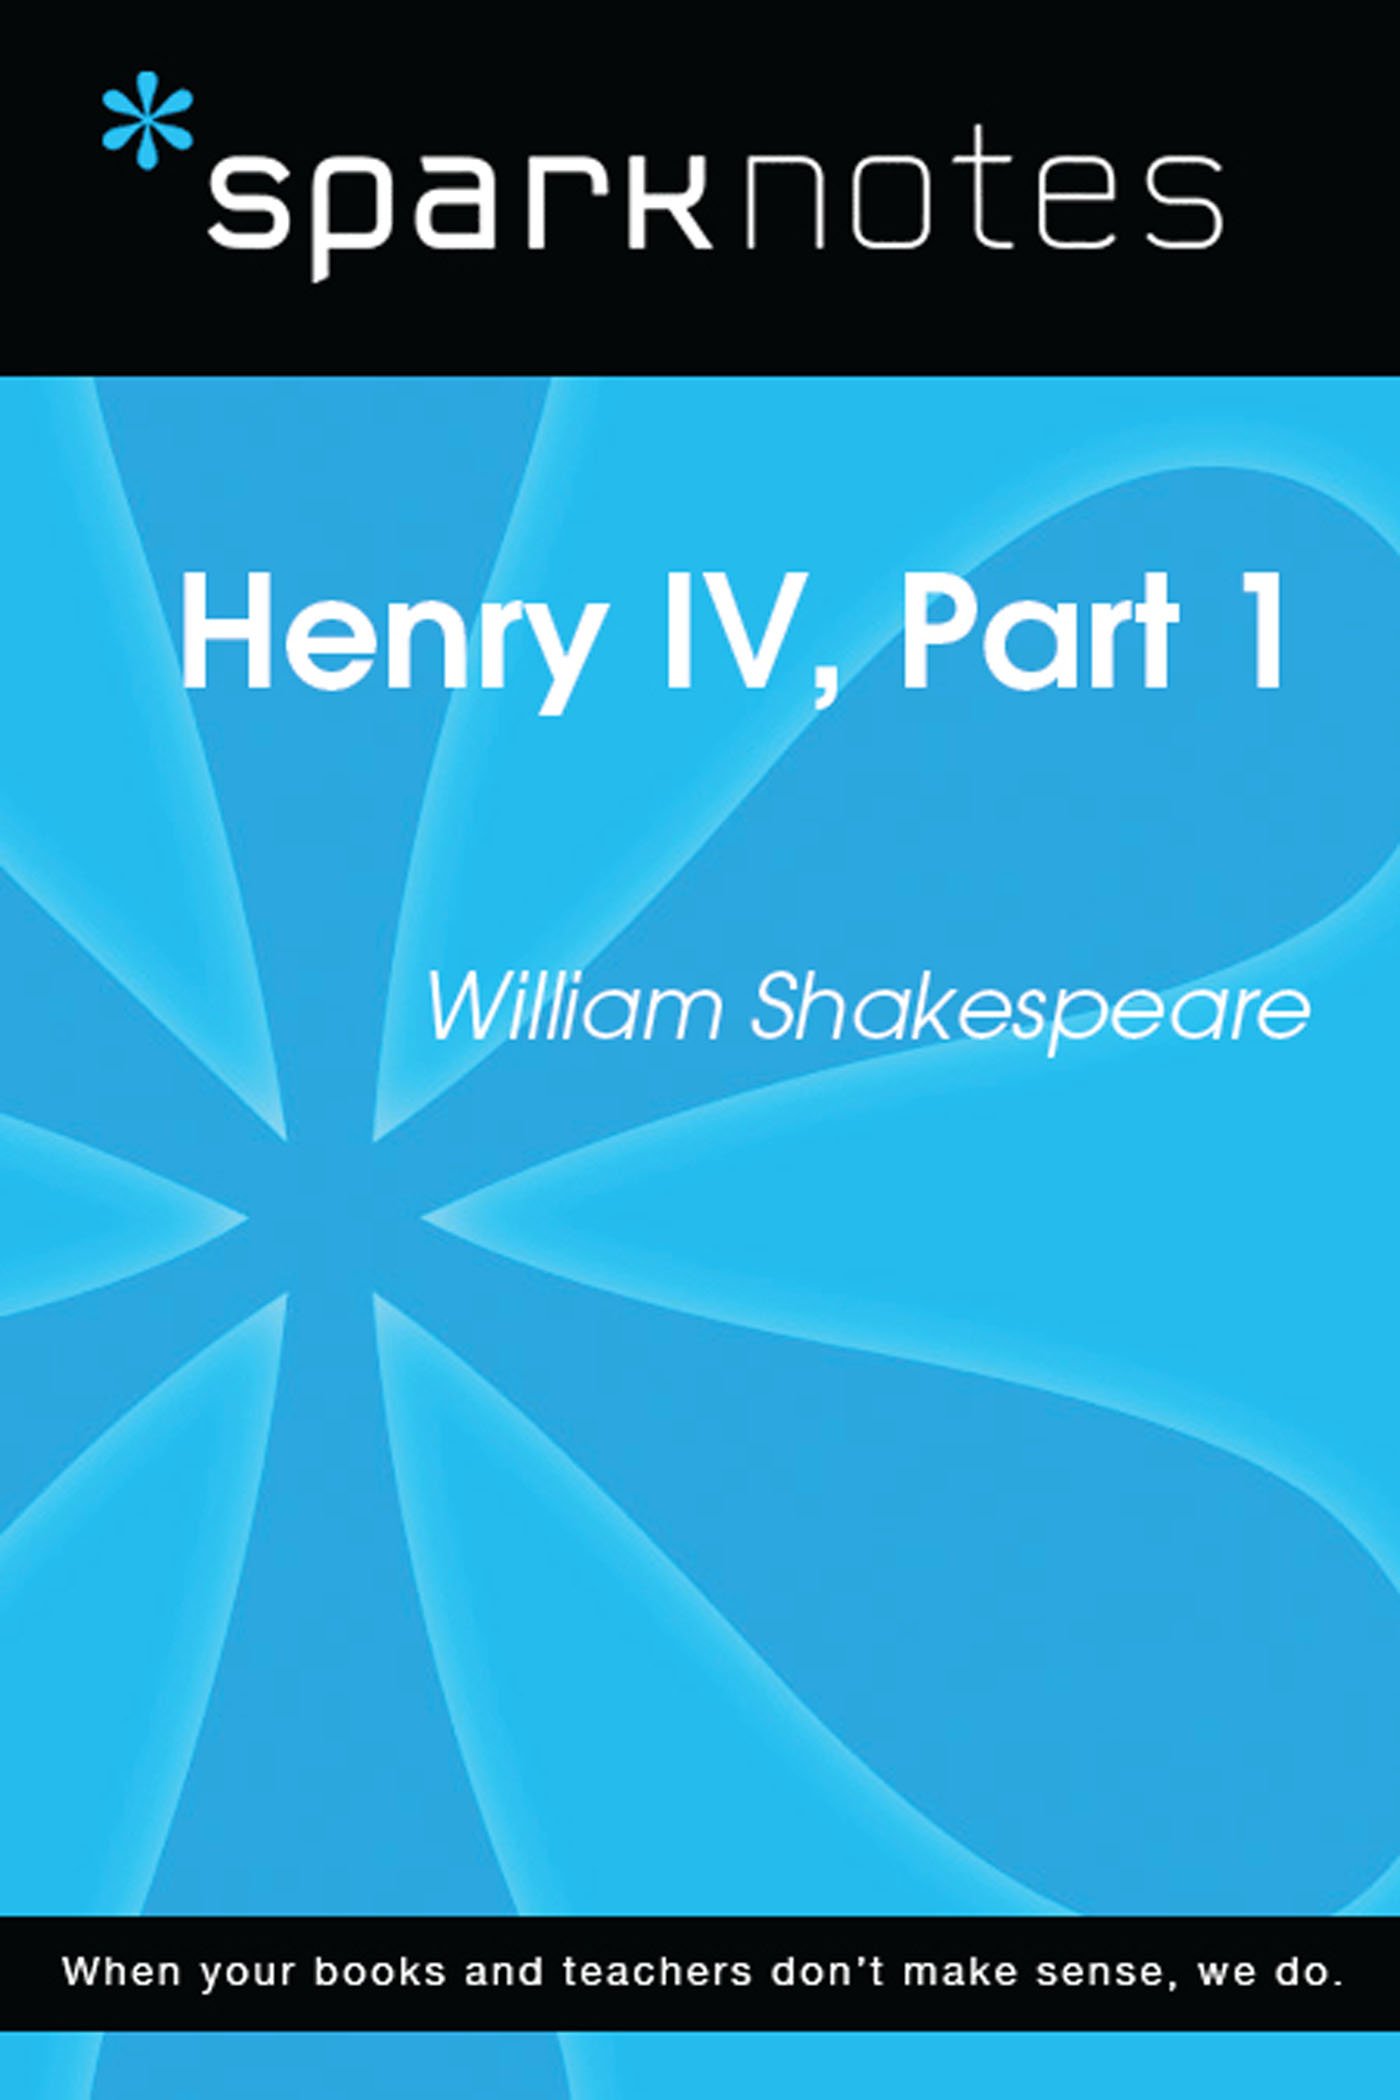 king henry iv part 1 sparknotes